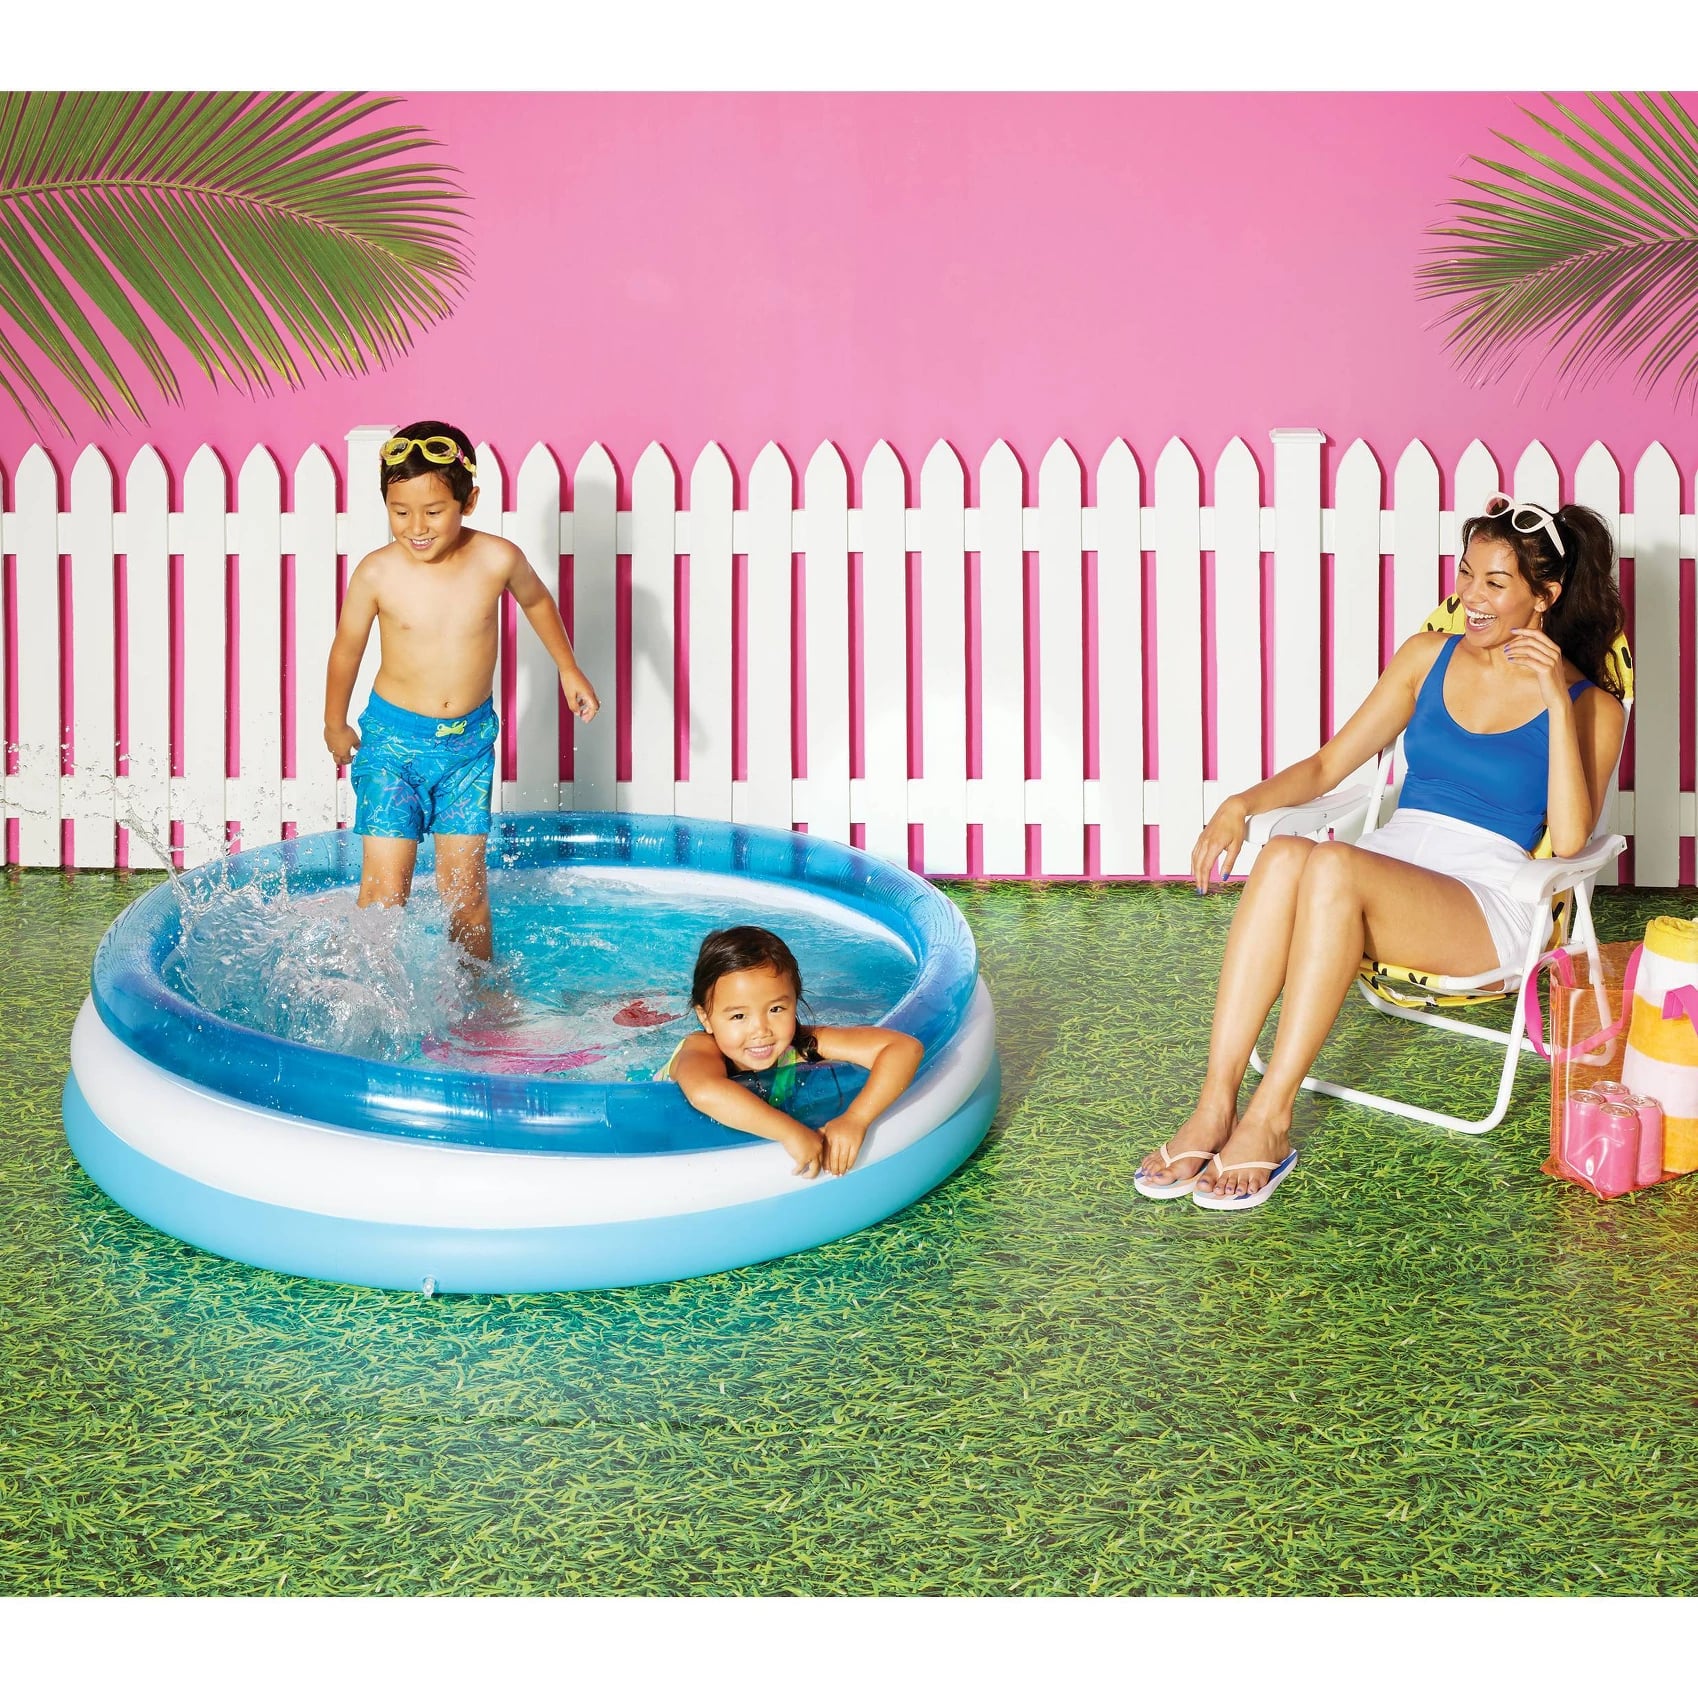 Inflatable Kids Kiddie Pool 49.2 Wx11.8 H Wading Pool for Toddler Durable Swimming Pool Family Above Ground Pool Summer Outside Round Pools for Children Adults Garden Backyard Blue 